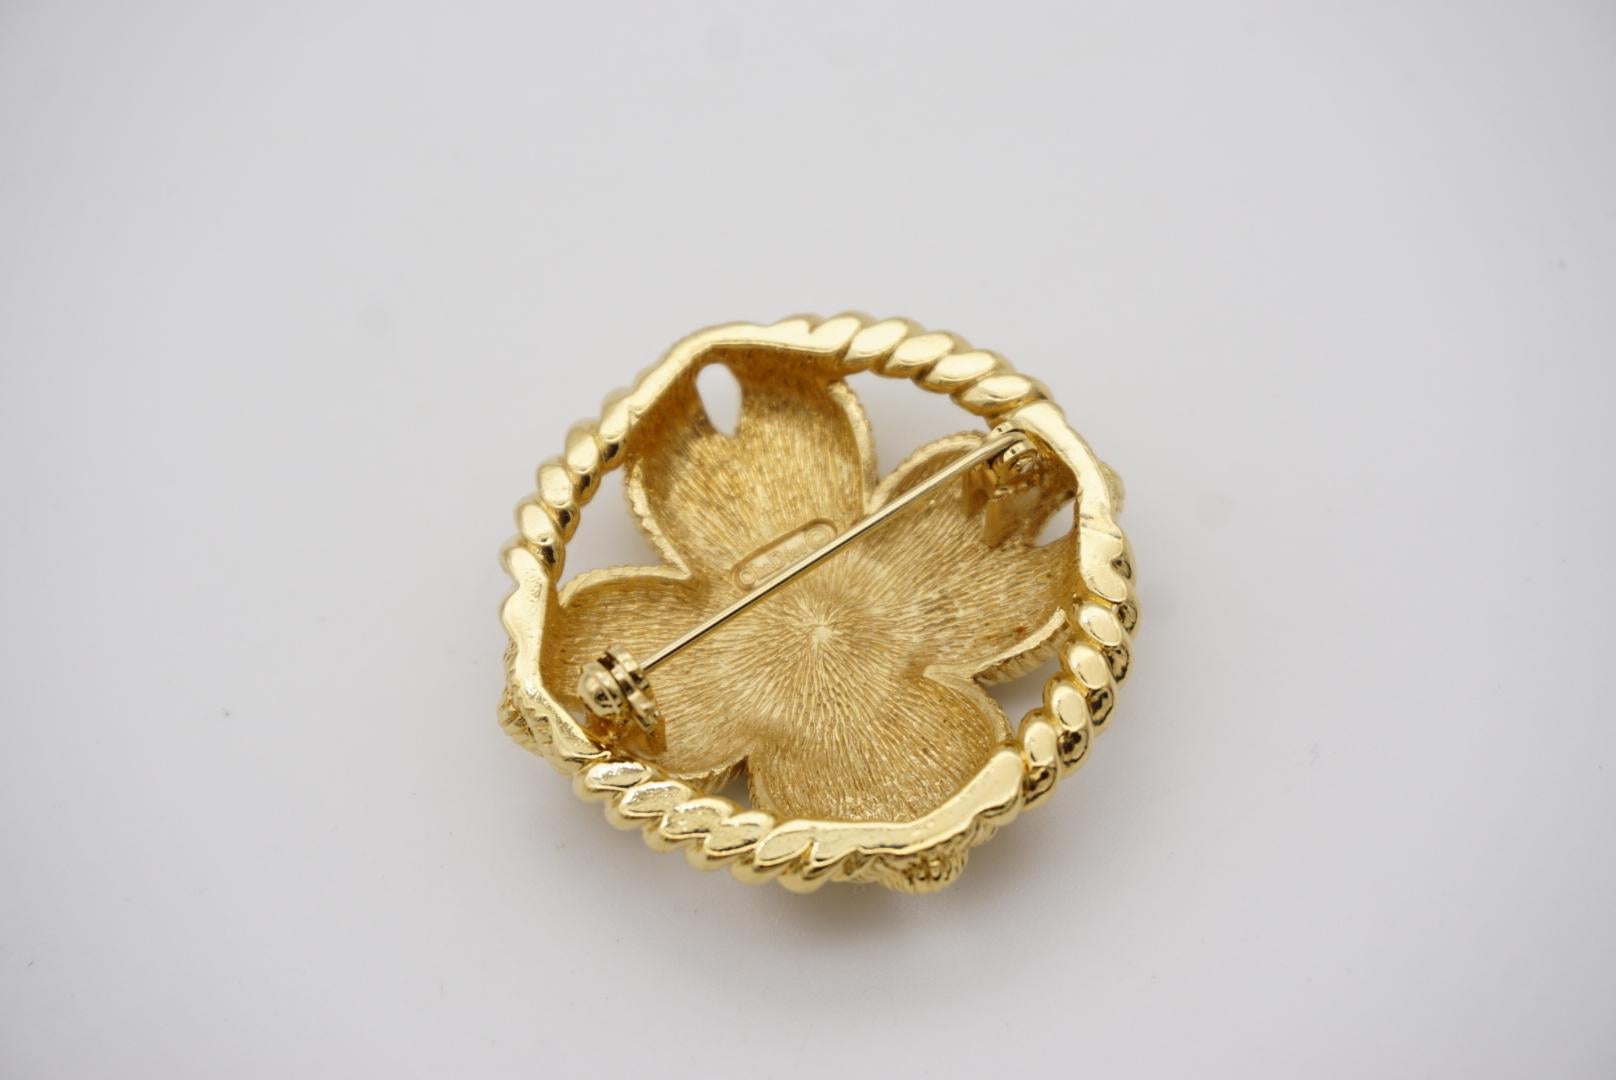 Christian Dior 1980s Vintage Textured Round Openwork Twist Knot Bow Gold Brooch For Sale 4